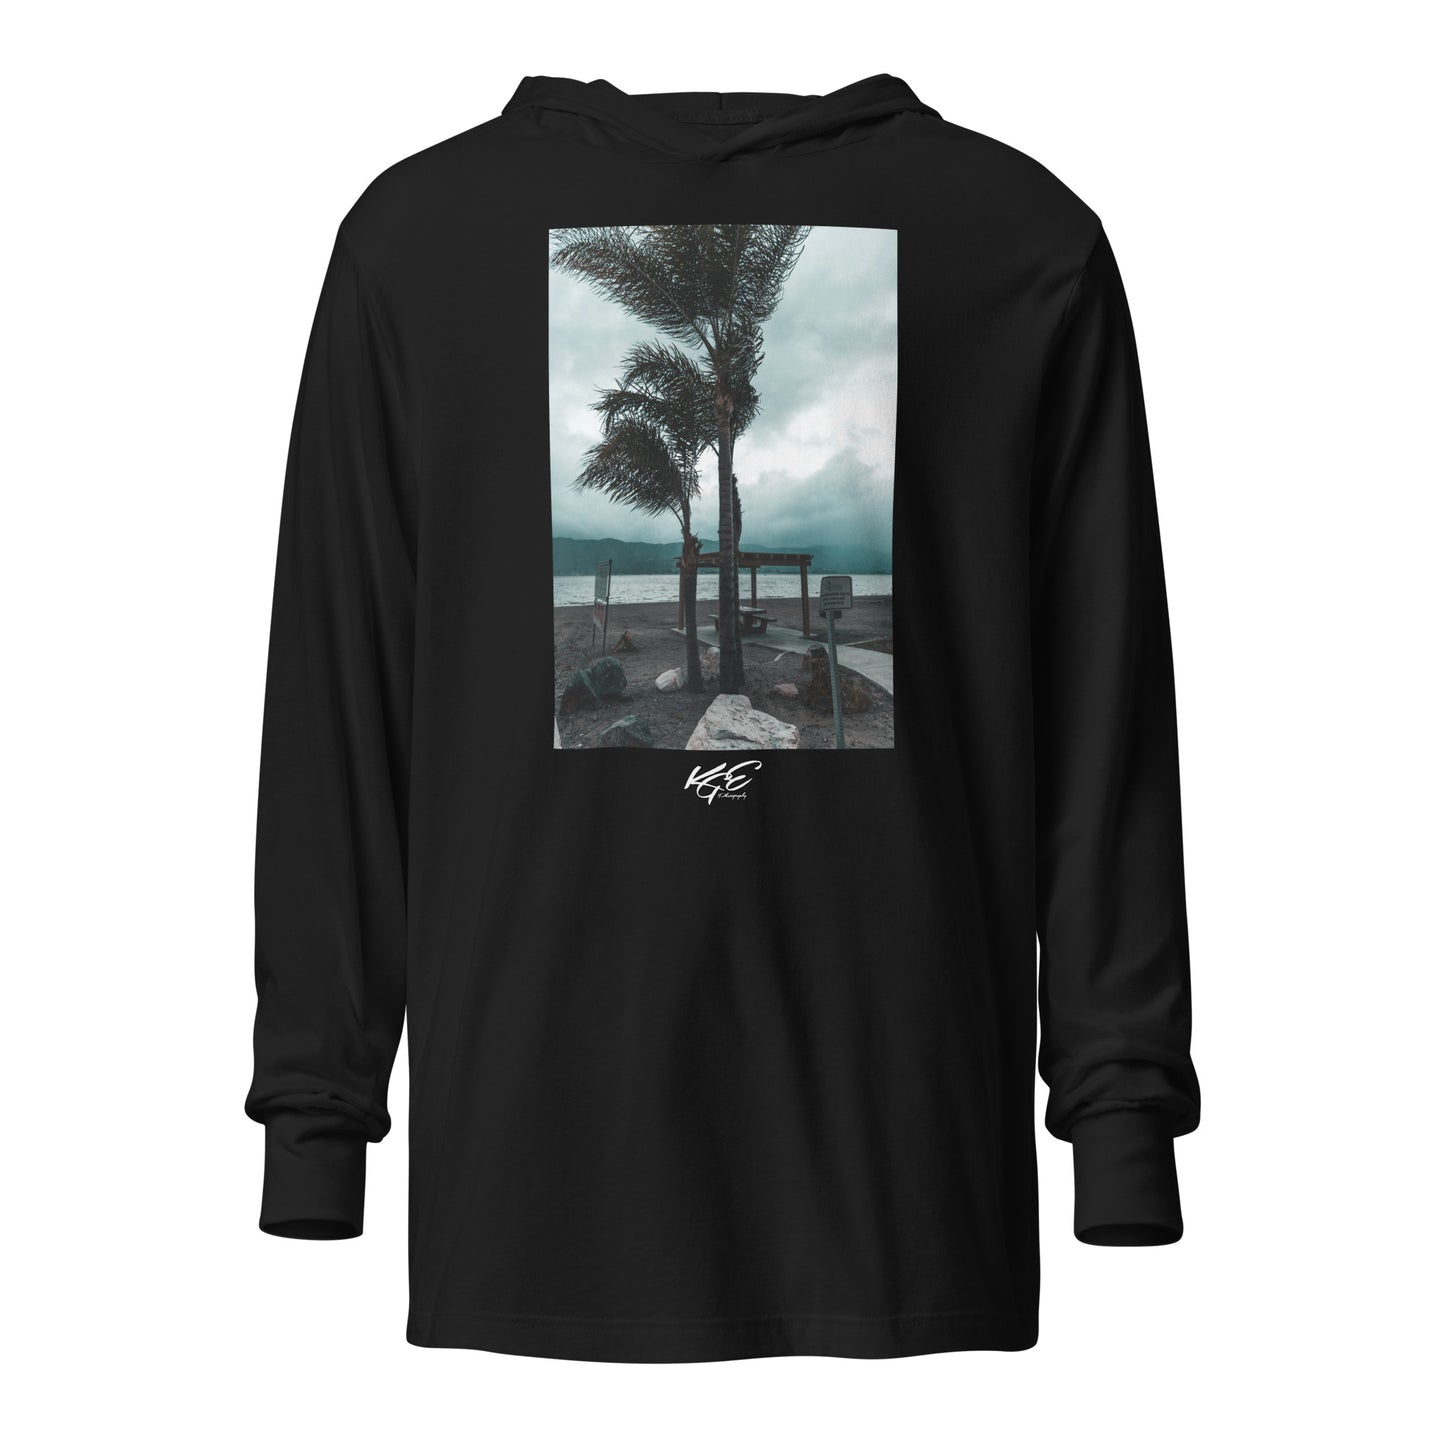 (New) Before the storm, Lake Elsinore CA - KGE Photography Hooded long-sleeve premium tee